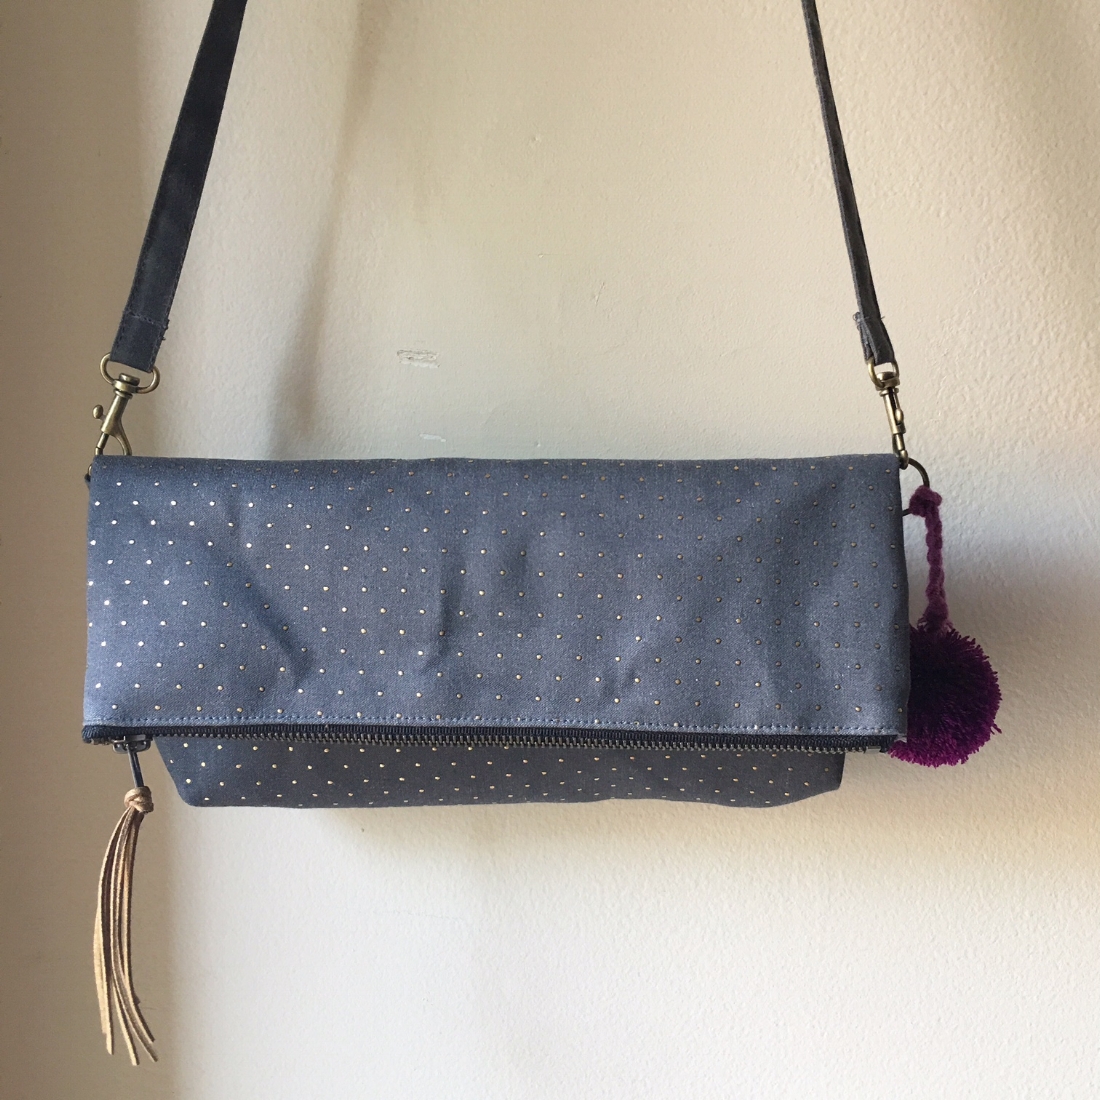 Connect-the-Dots Crossbody Bag